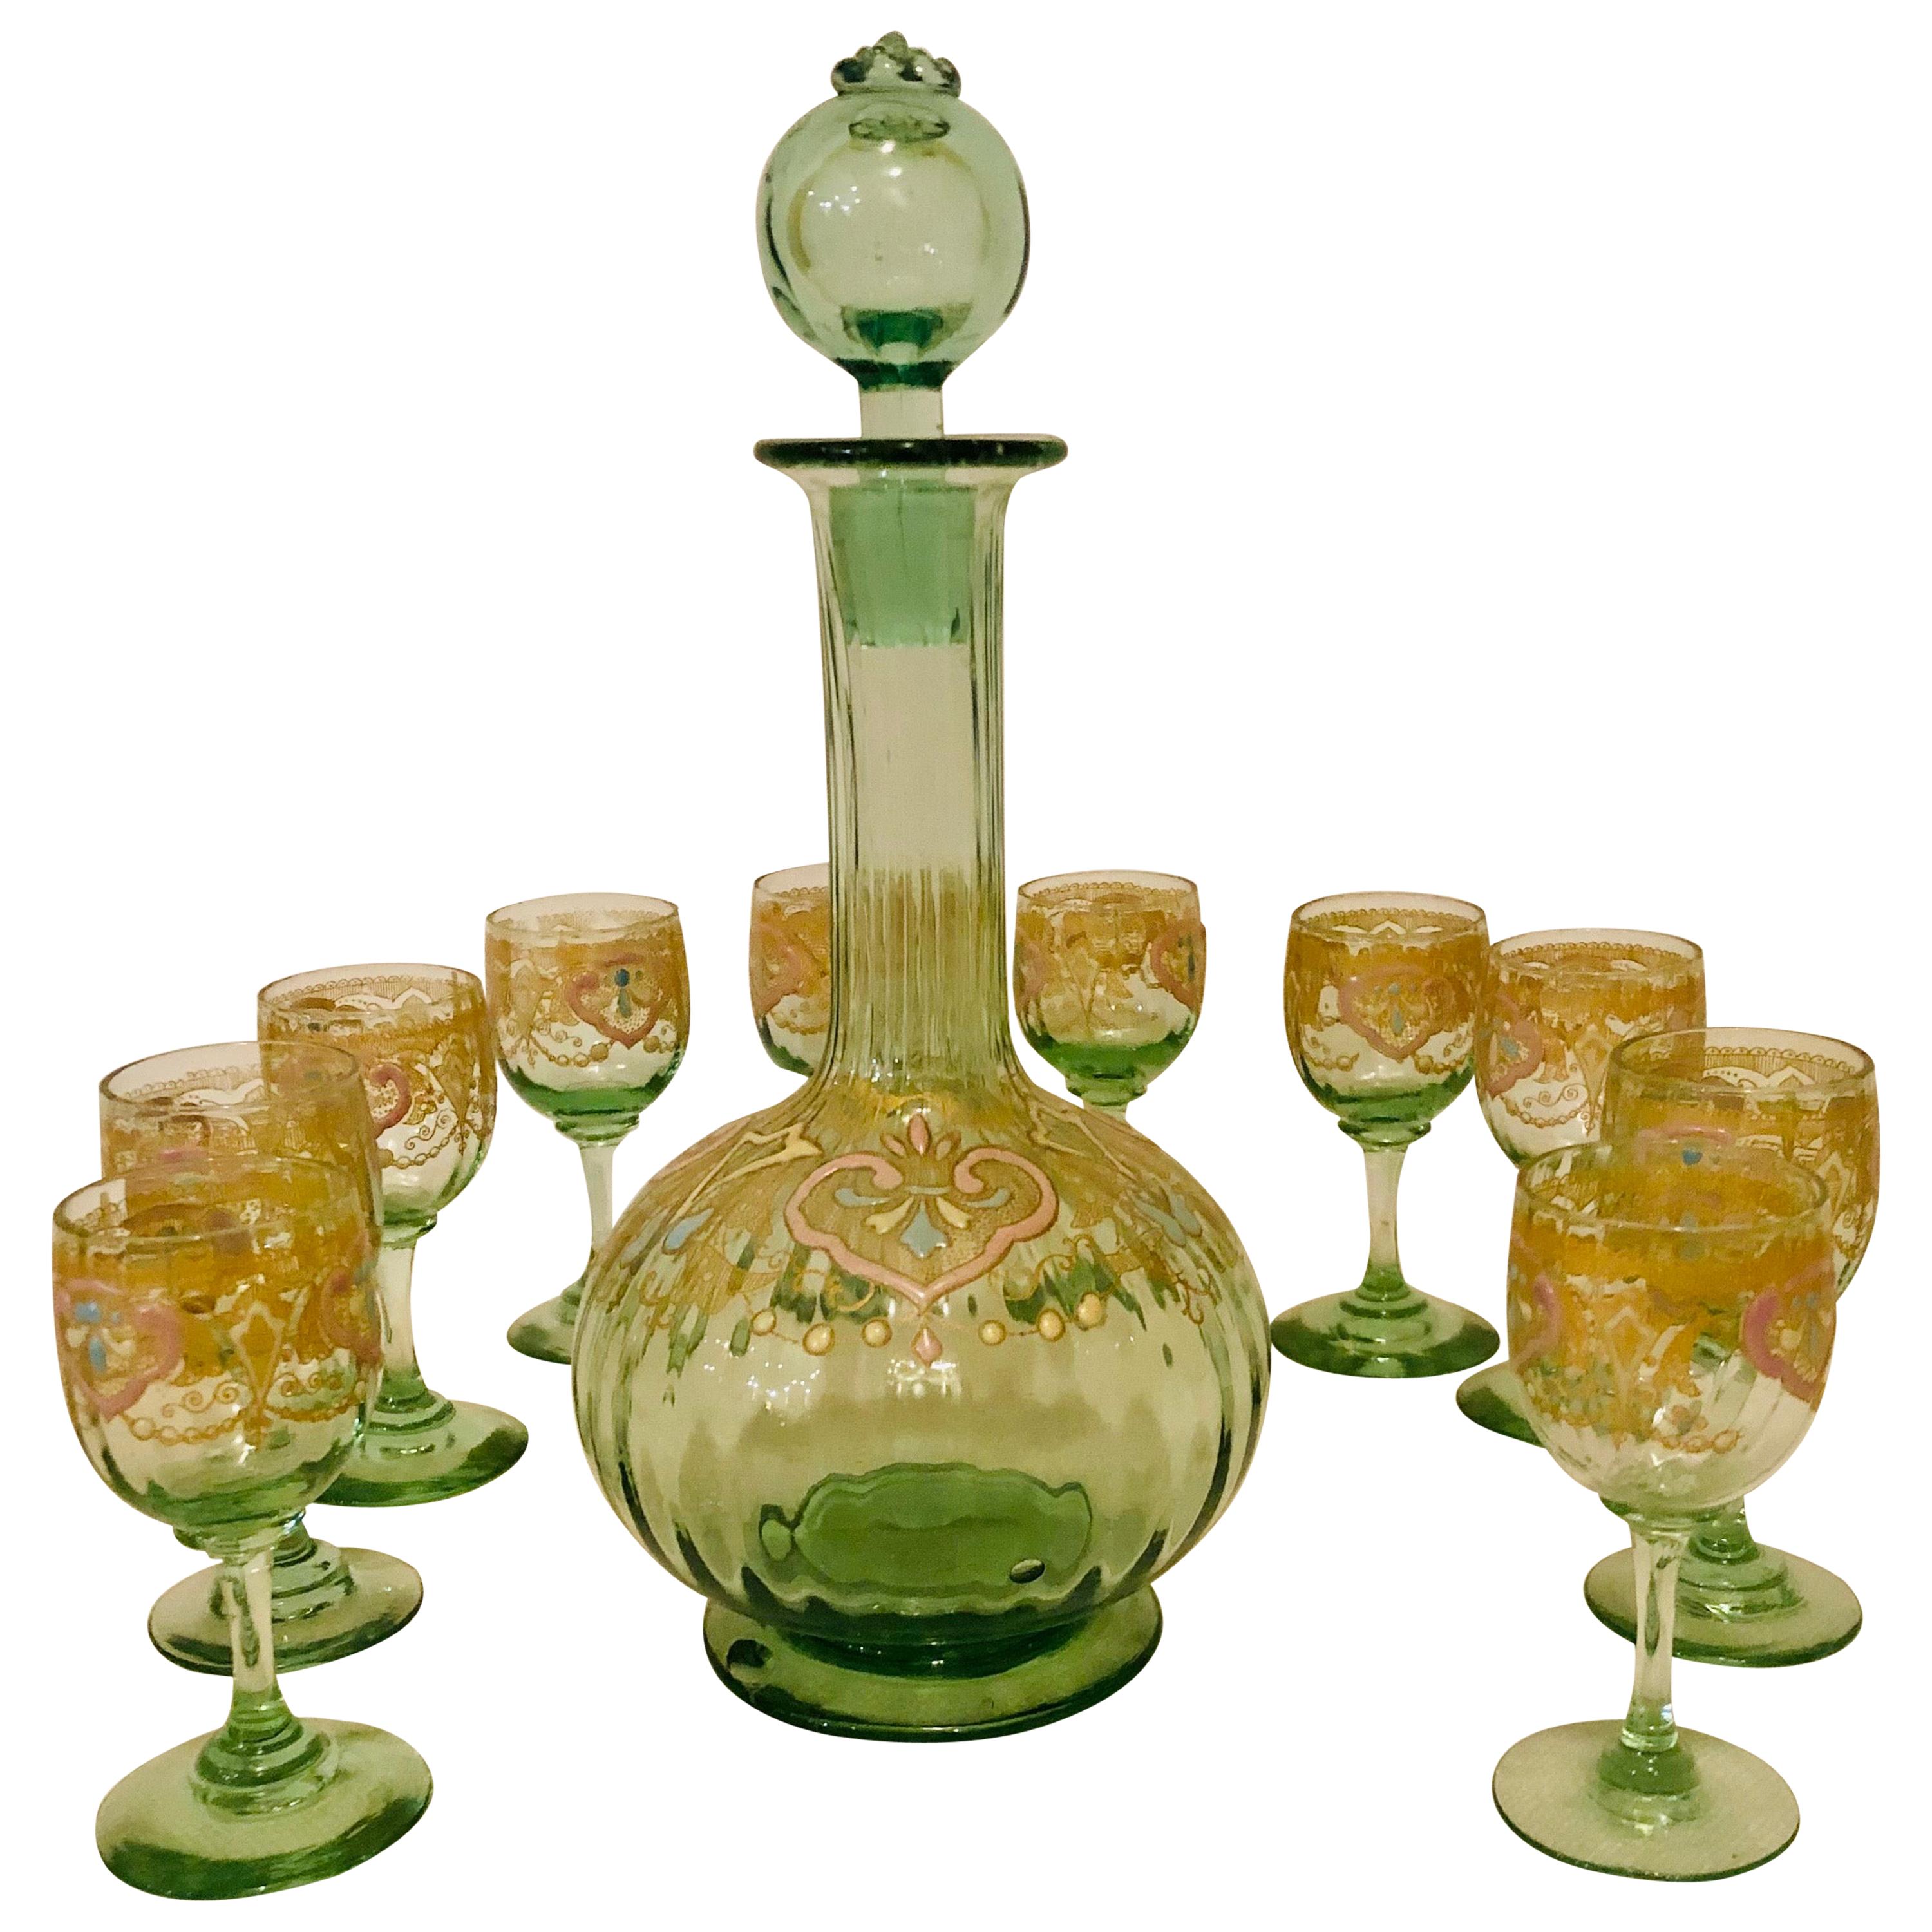 Venetian Decanter With Ten Venetian Cordial Glasses With Colorful Enamel Accents